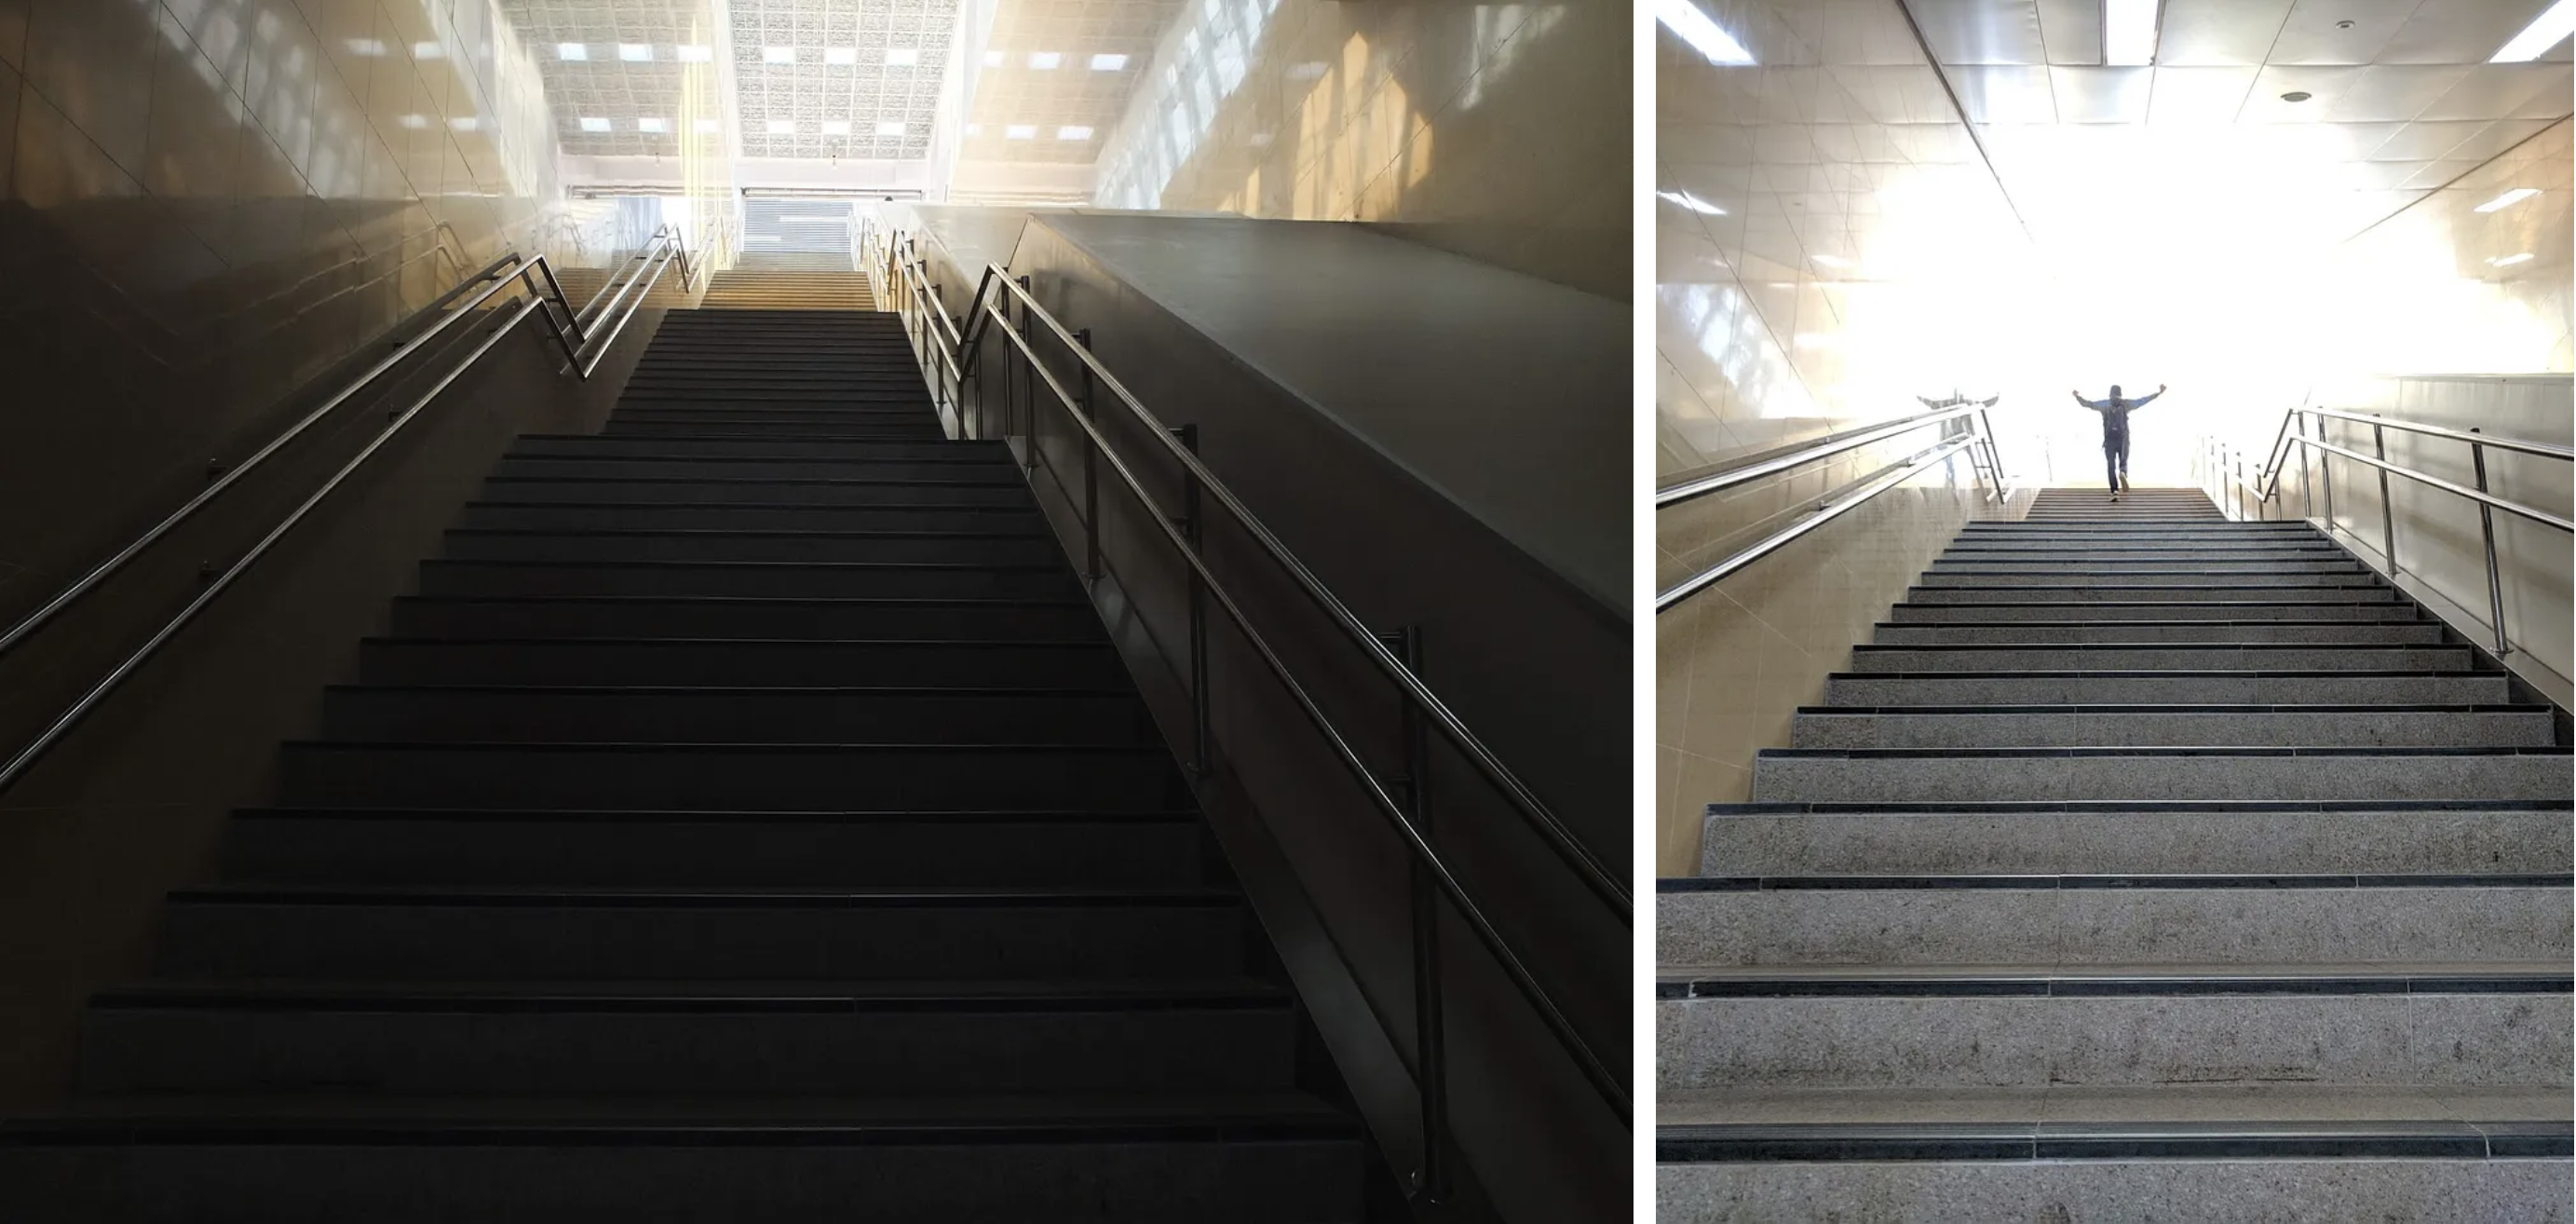 Left: very long stairs going up, and no elevator visible; right: a person shows accomplishment while bathing in light from the surface after reaching the top of the floor looks like a person achieved heaven